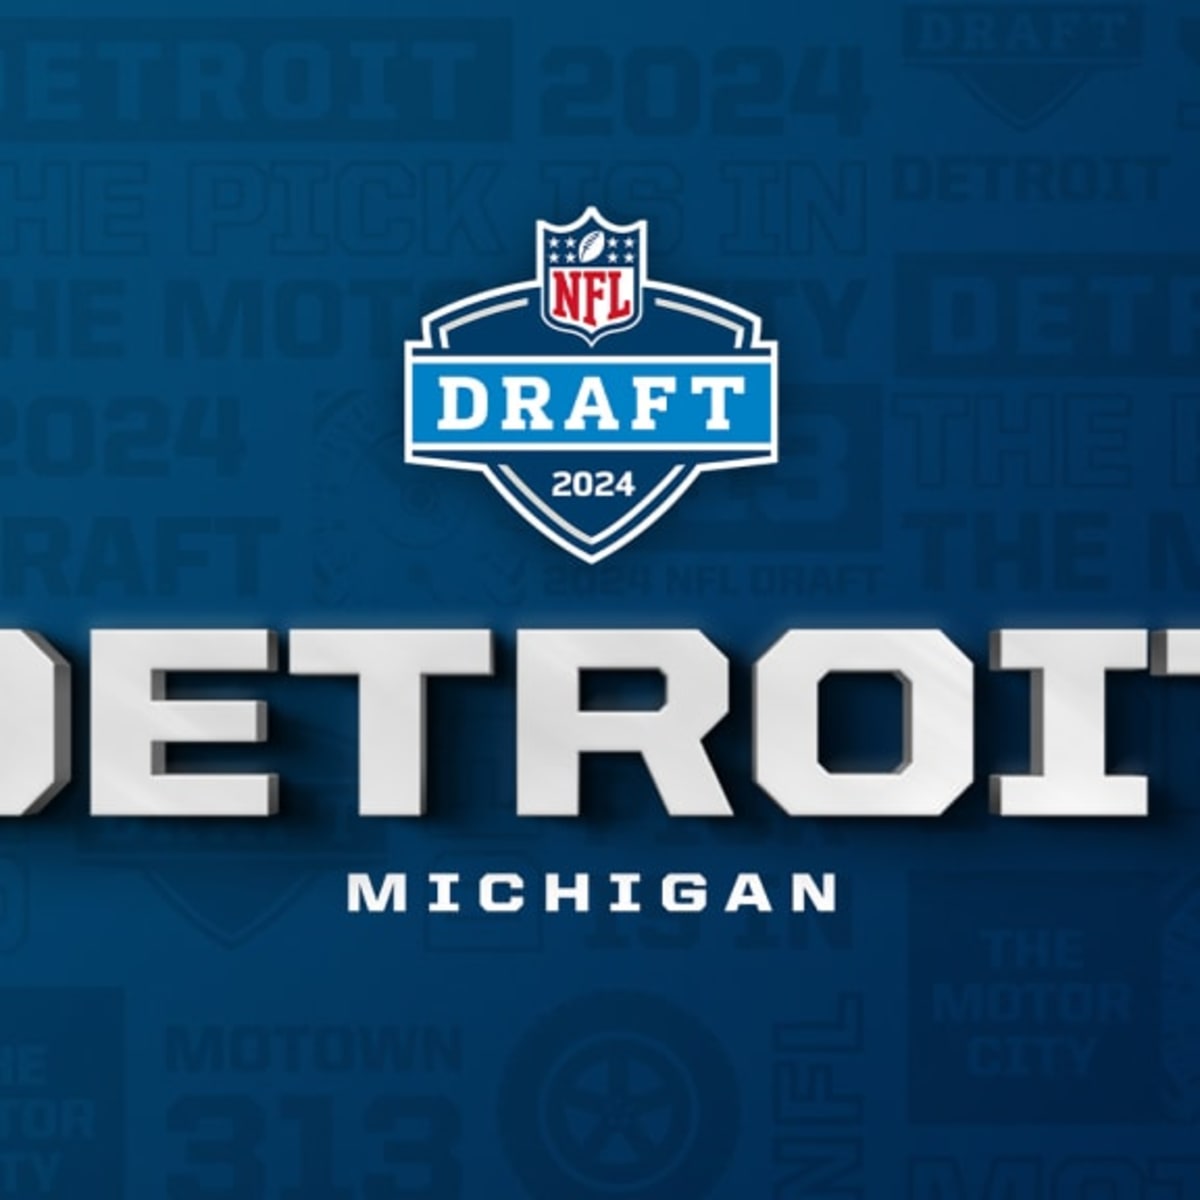 Detroit to Host 2024 NFL Draft - Visit NFL Draft on Sports Illustrated, the  latest news coverage, with rankings for NFL Draft prospects, College  Football, Dynasty and Devy Fantasy Football.